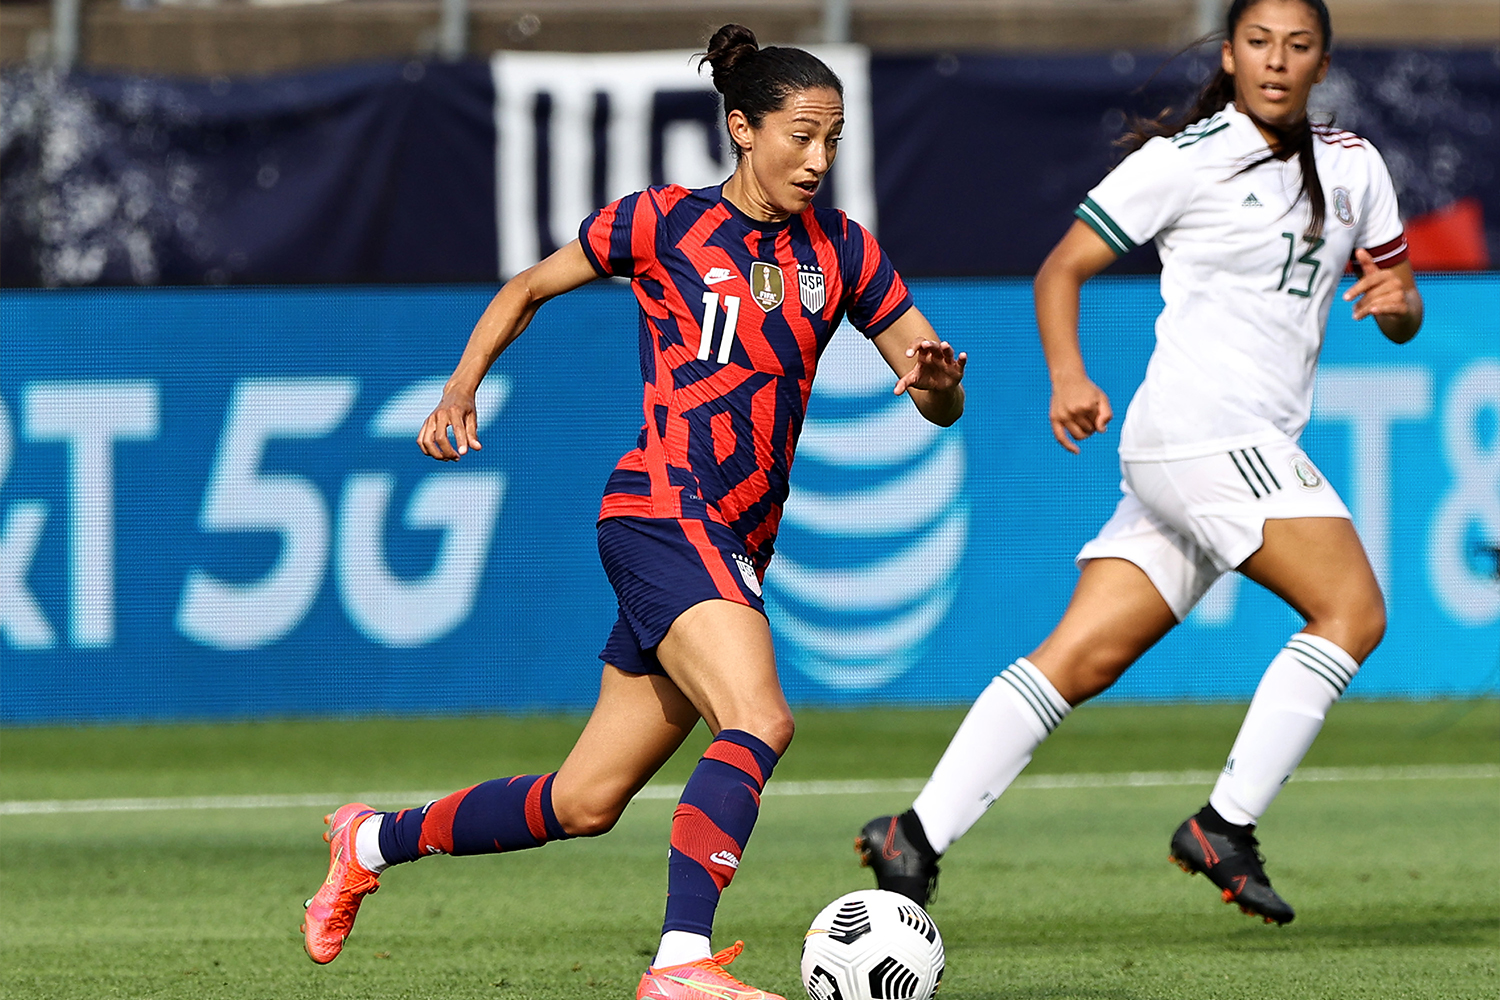 USA soccer star Christen Press in one of the team's new Olympic uniforms